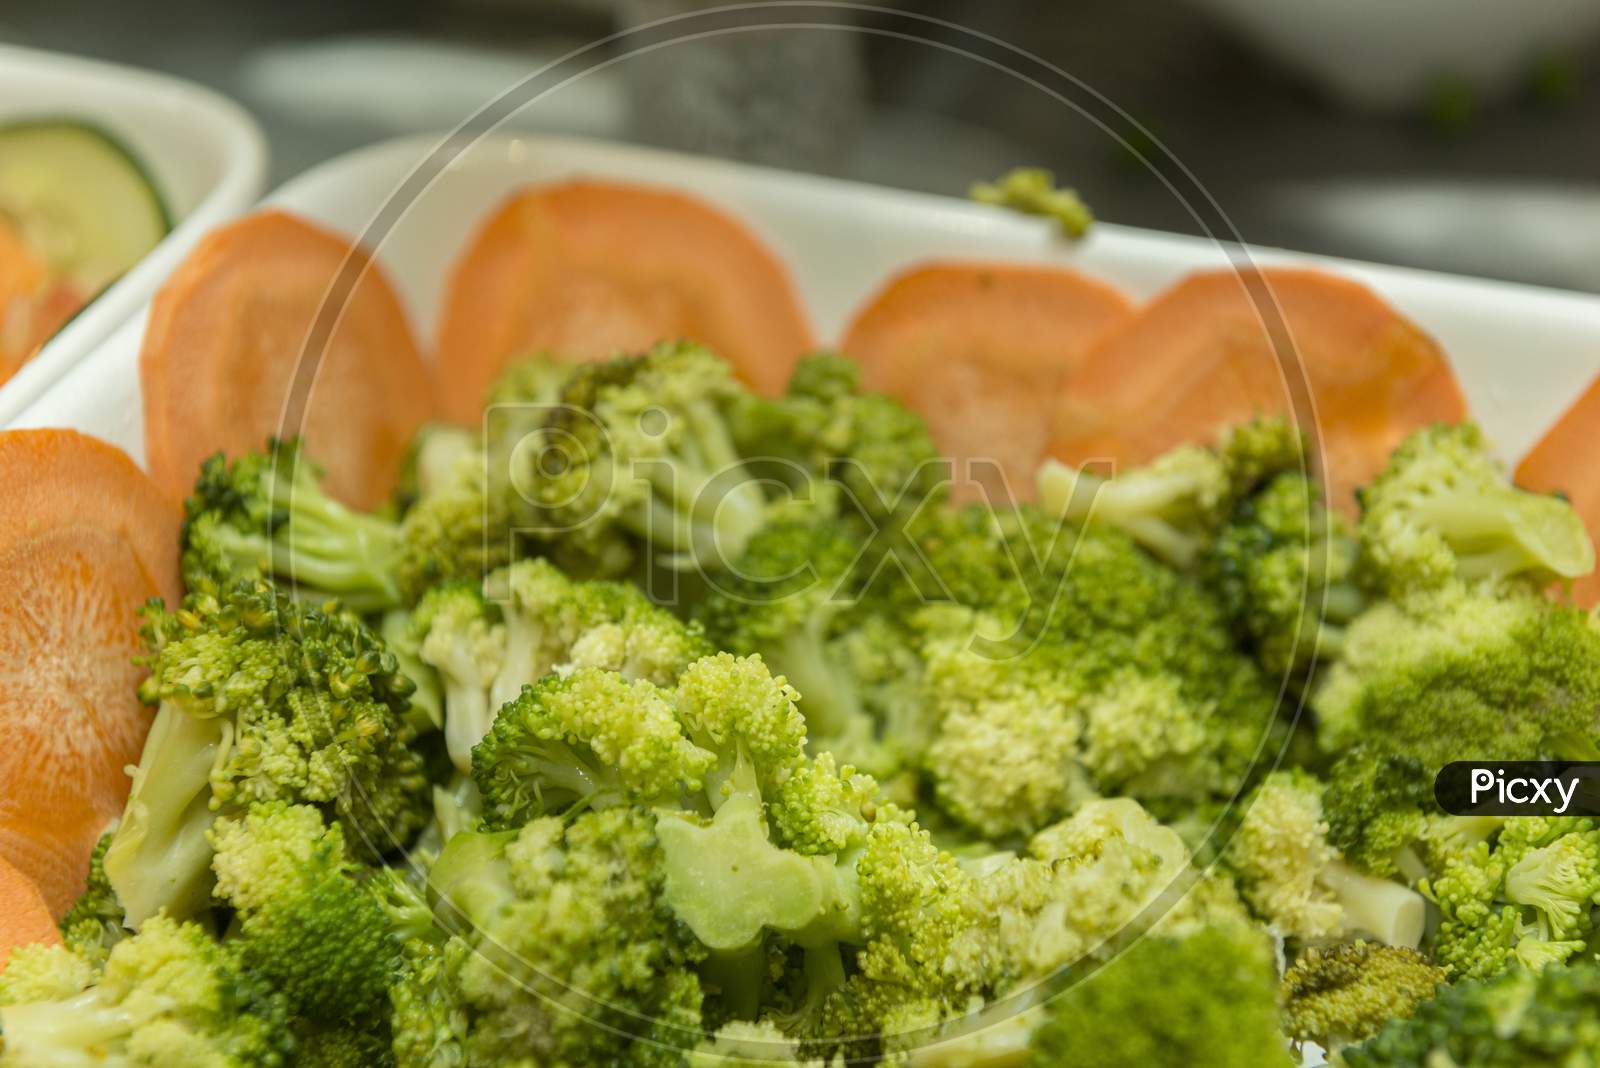 Isolated Dish Of Green Salad, Broccoli. Organic Food For A Healthy Lifestyle.